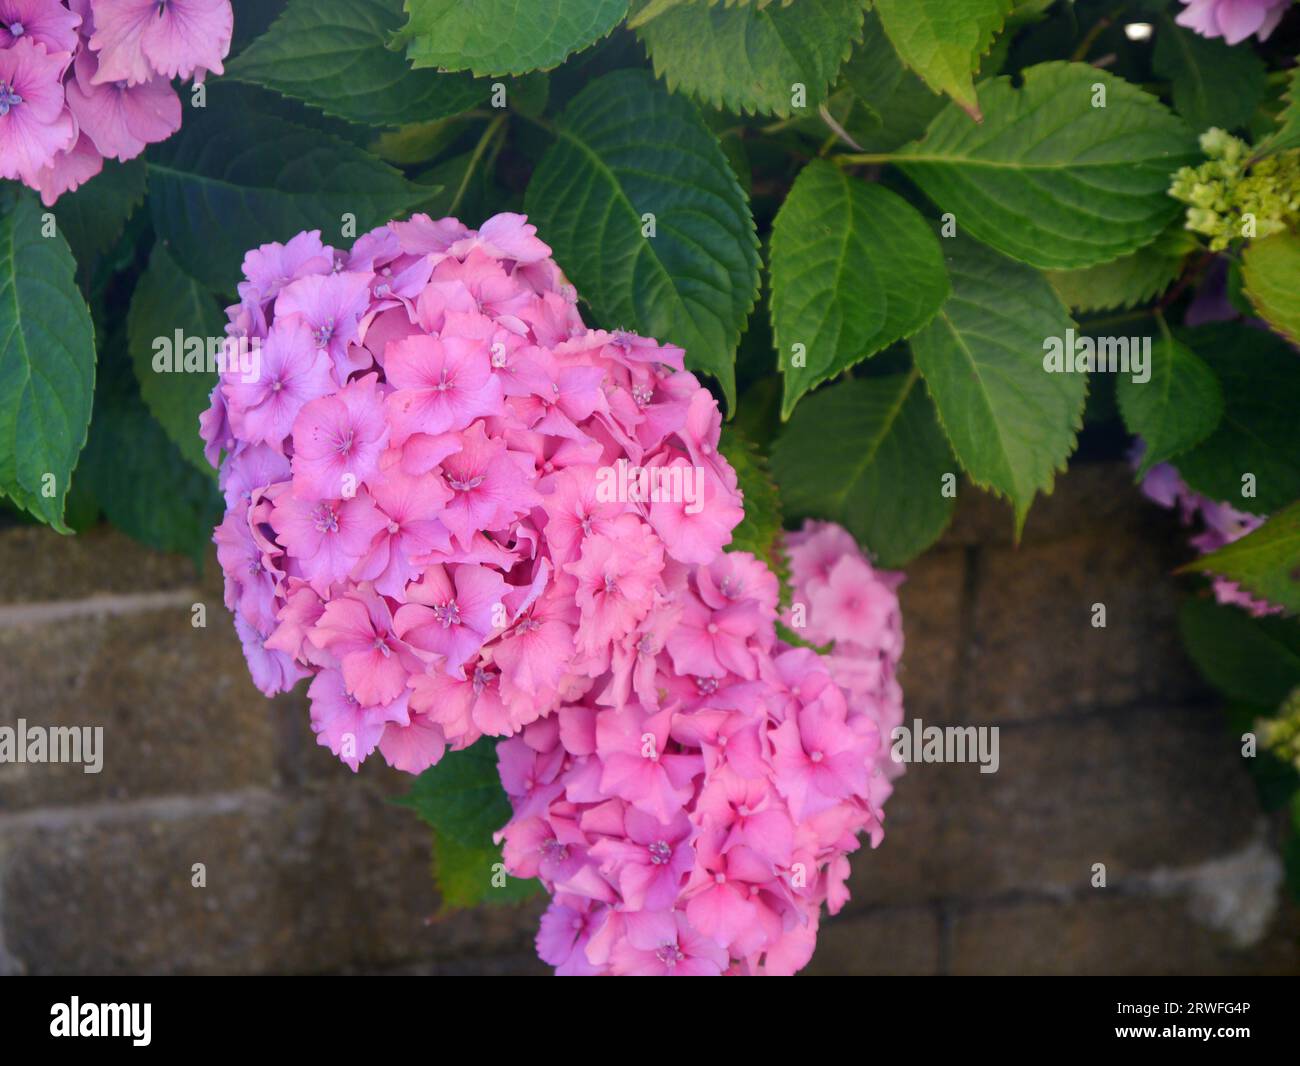 Large Conical-shaped Mauve/Lilac Hydrangea Macrophylla Flowerheads grown in an English Cottage Garden, Lancashire, England, UK. Stock Photo